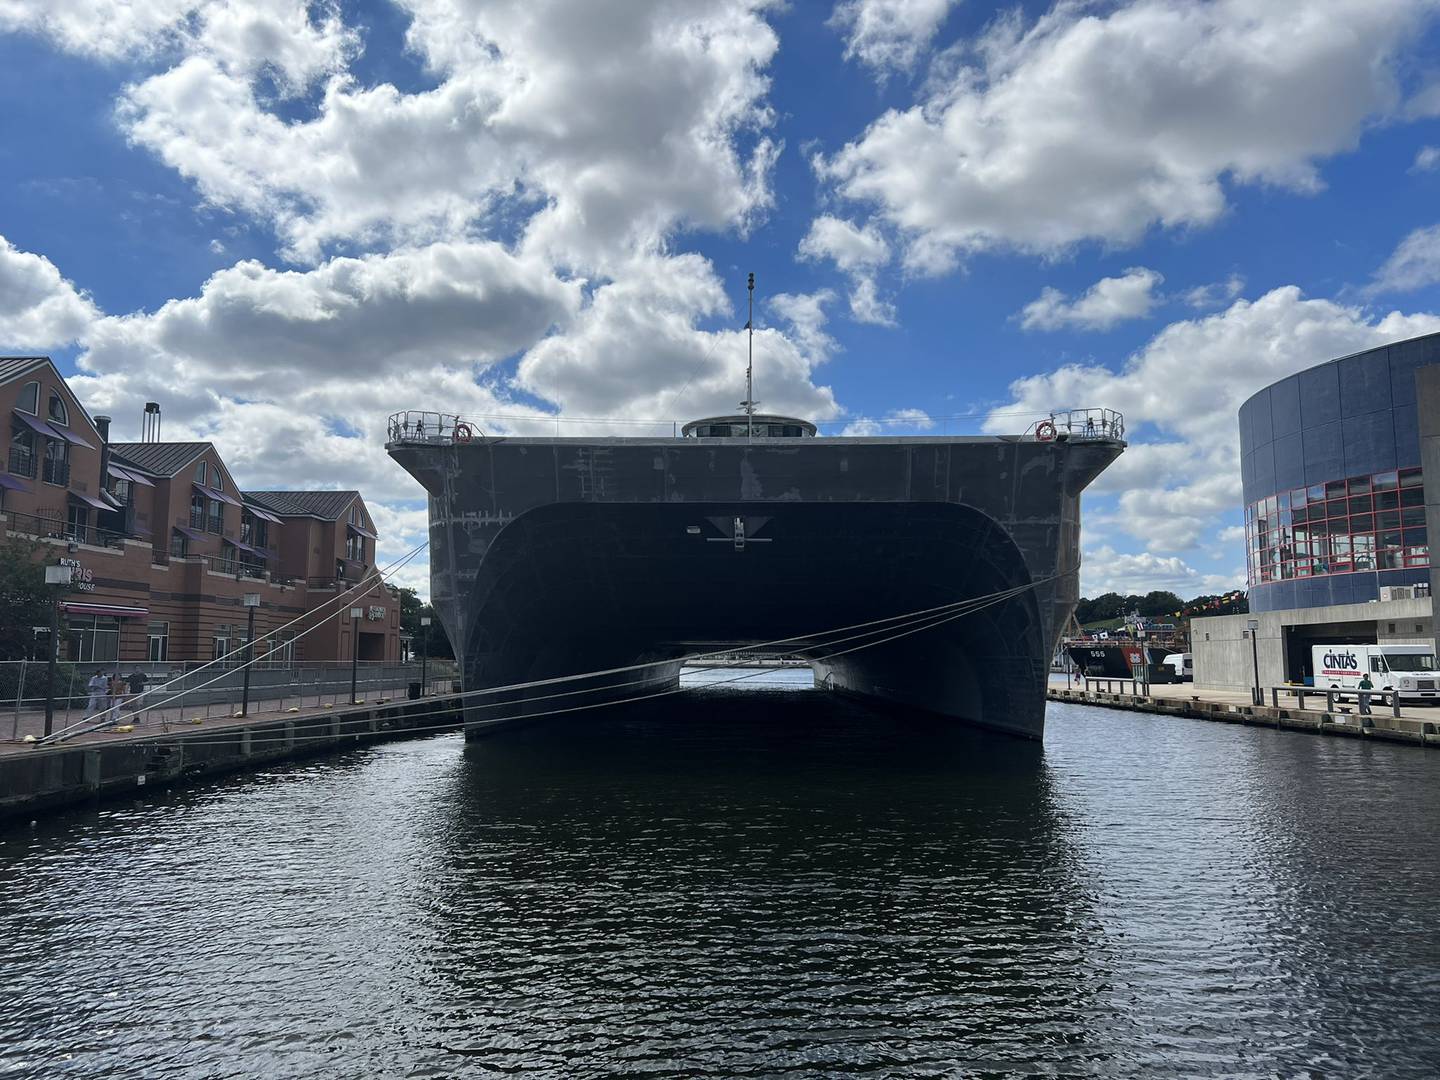 A large twin-hulled transport ship docked between two piers in Baltimore's harbor.